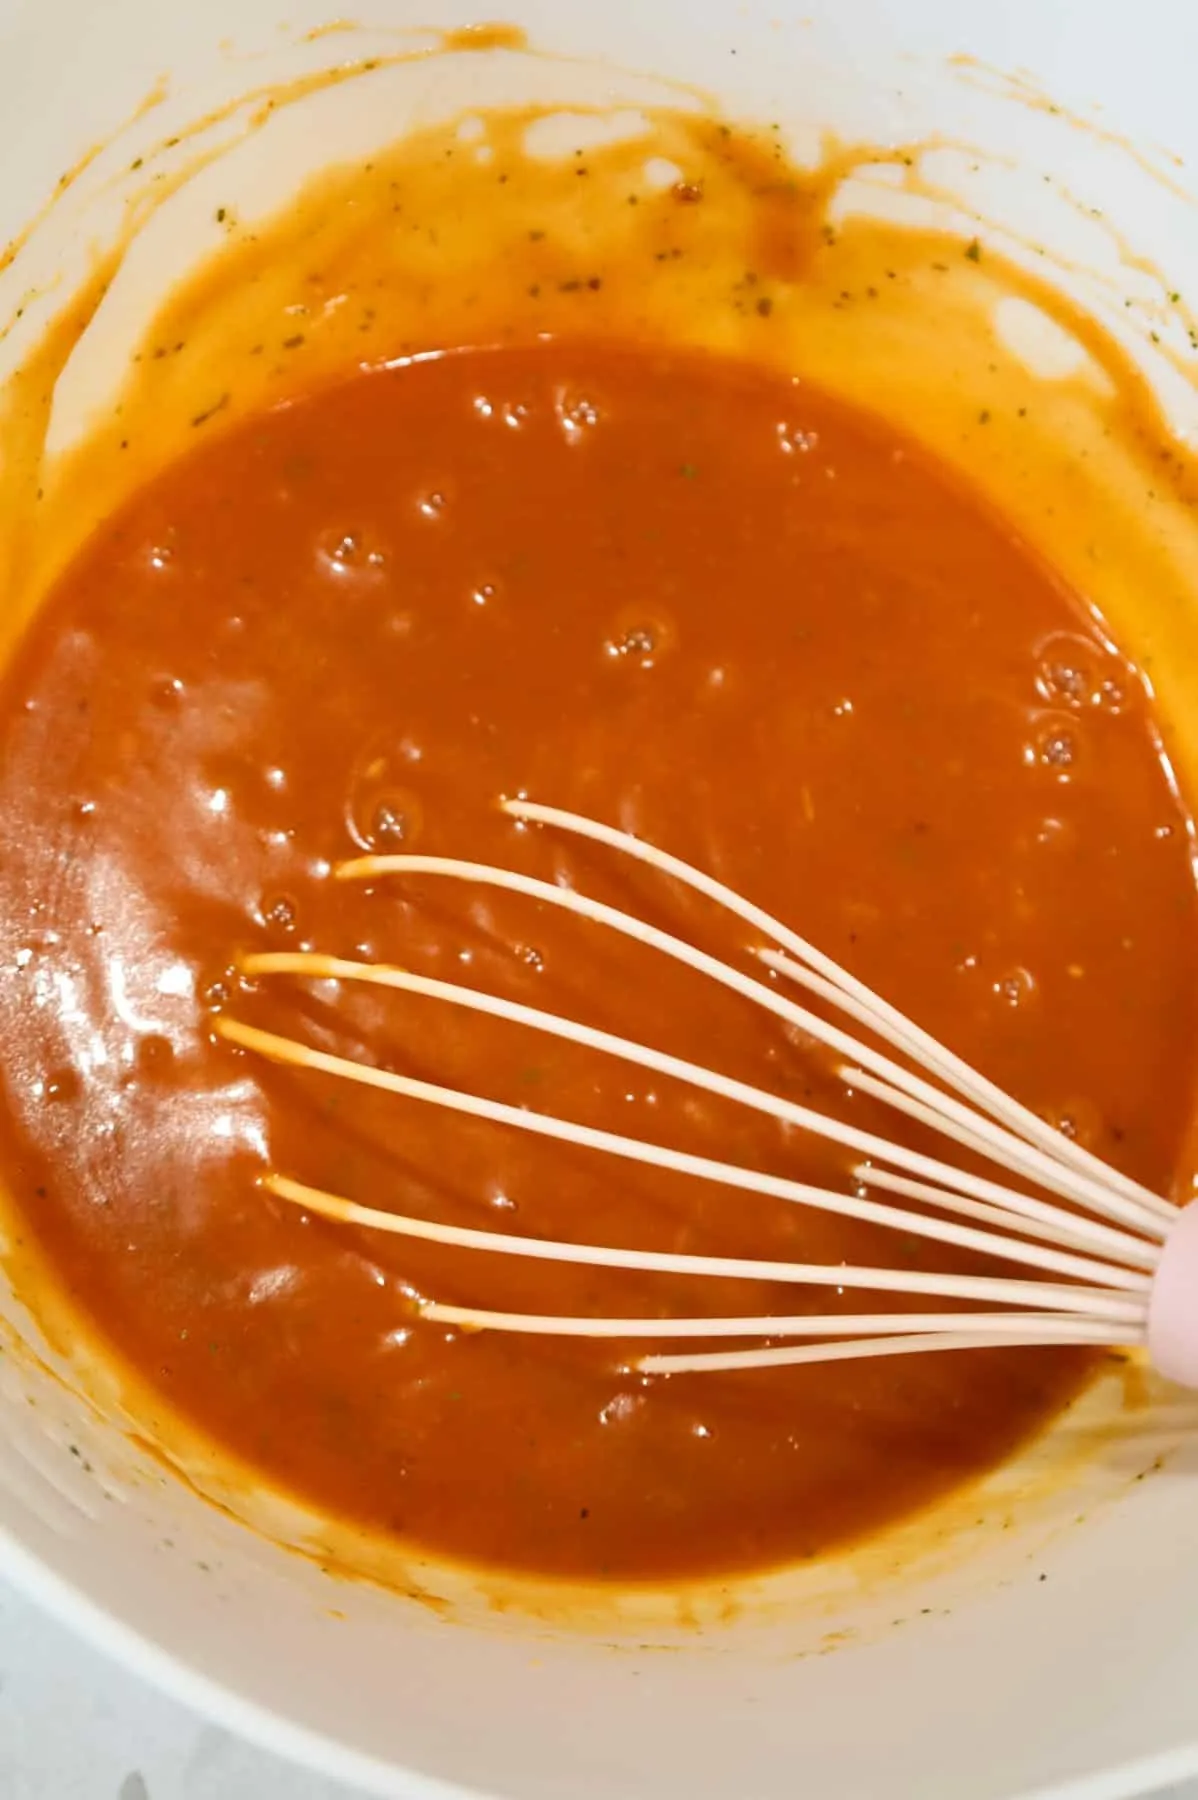 tomato soup mixture being whisked in a bowl